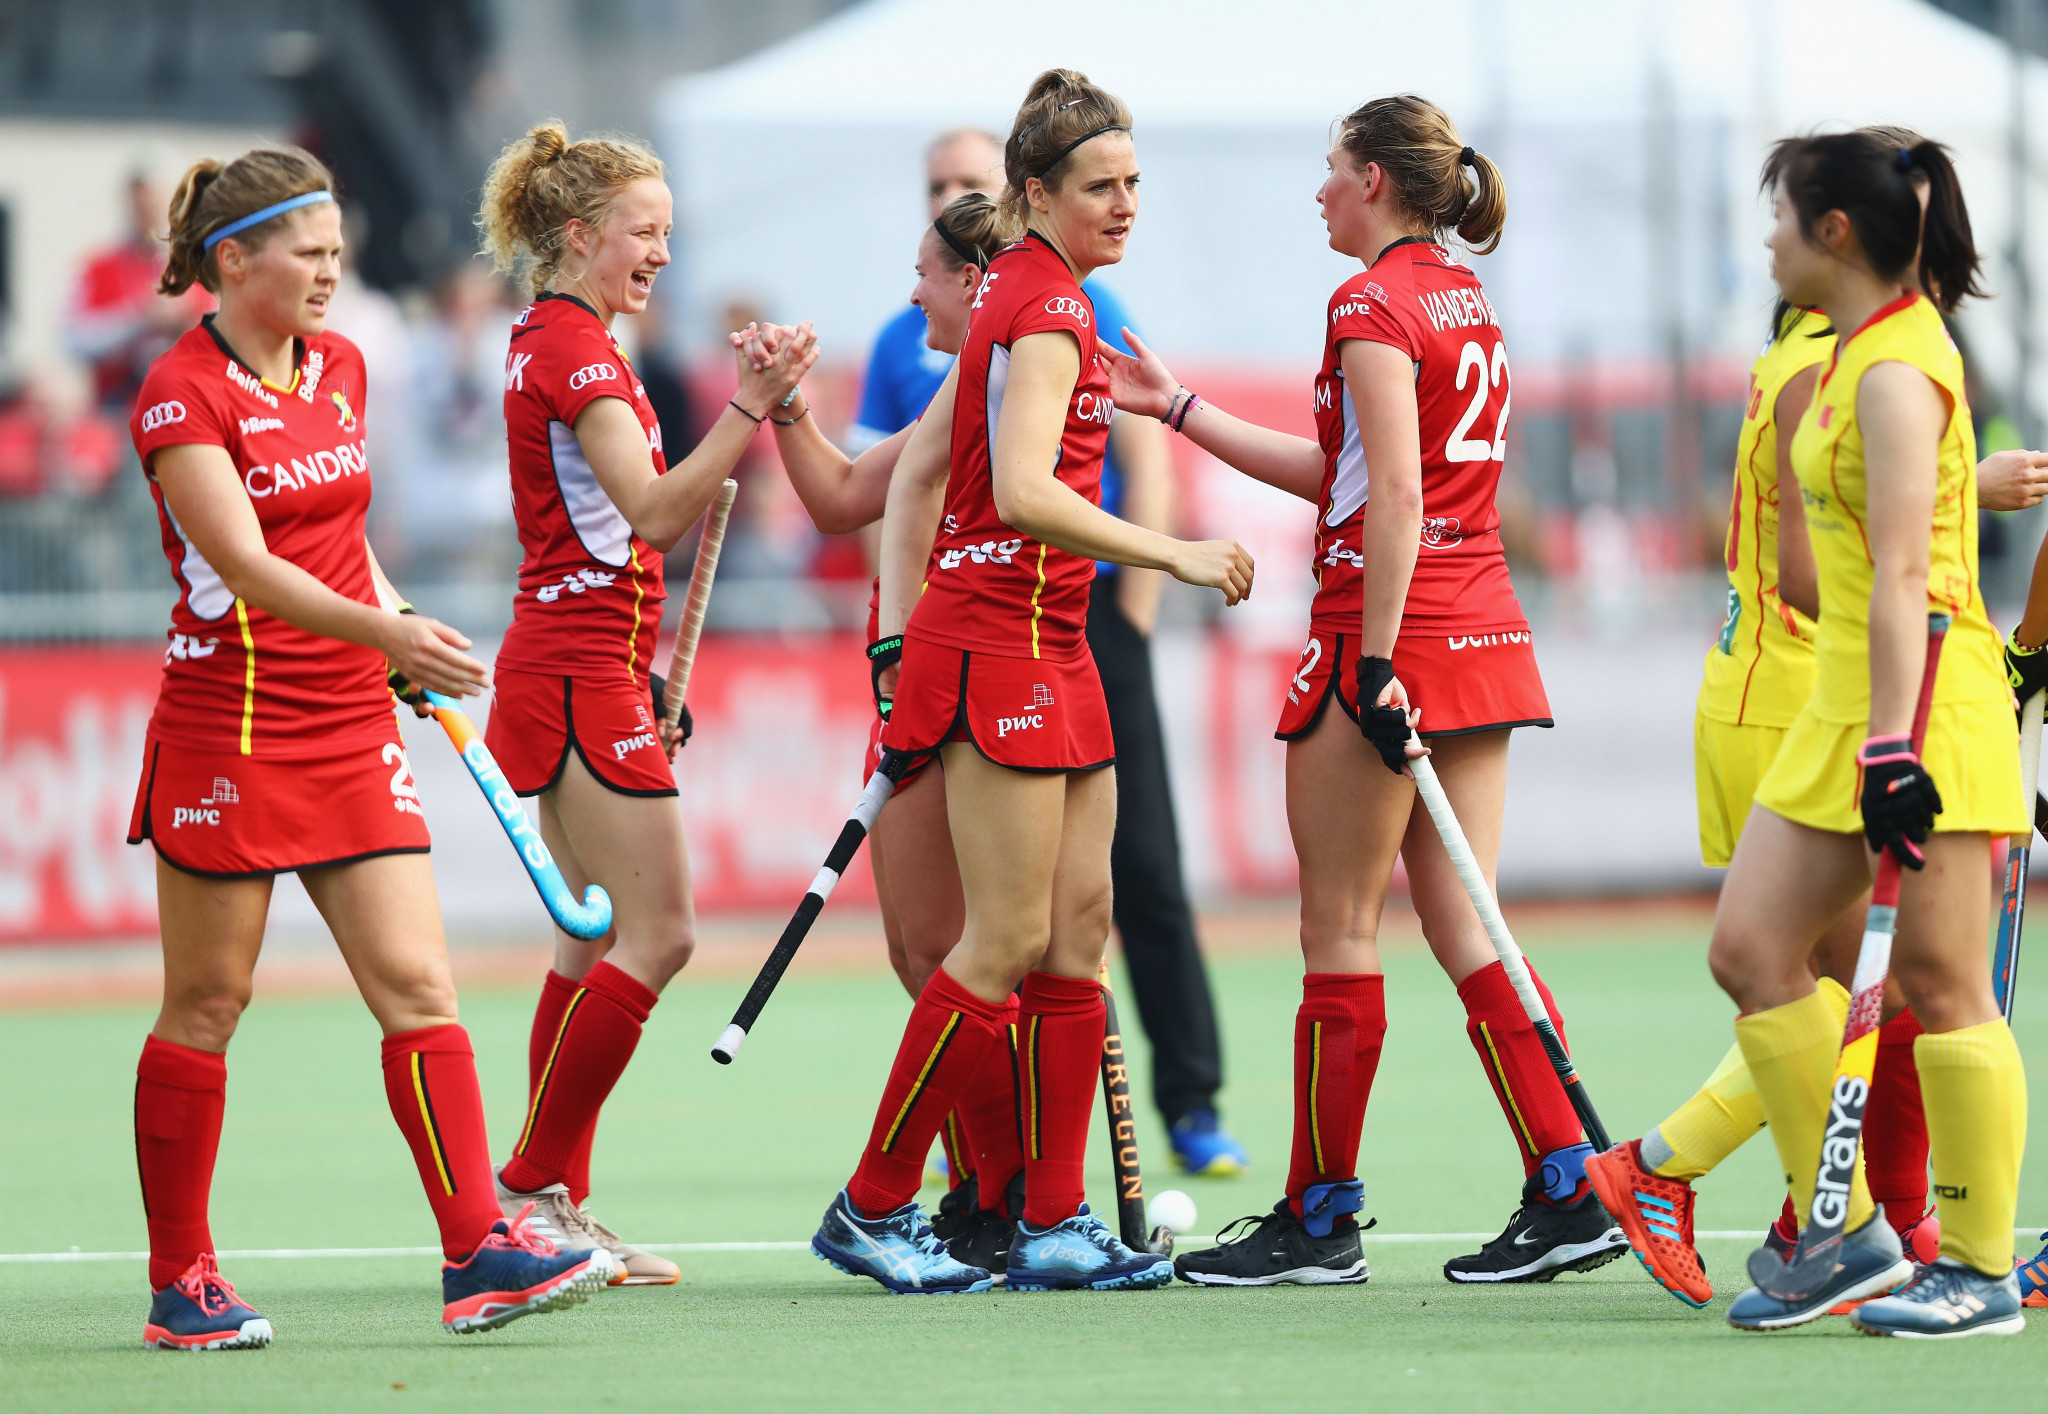 Belgium, ranked 13th in the world, beat China today 4-1 in the FIH Pro League ©Getty Images